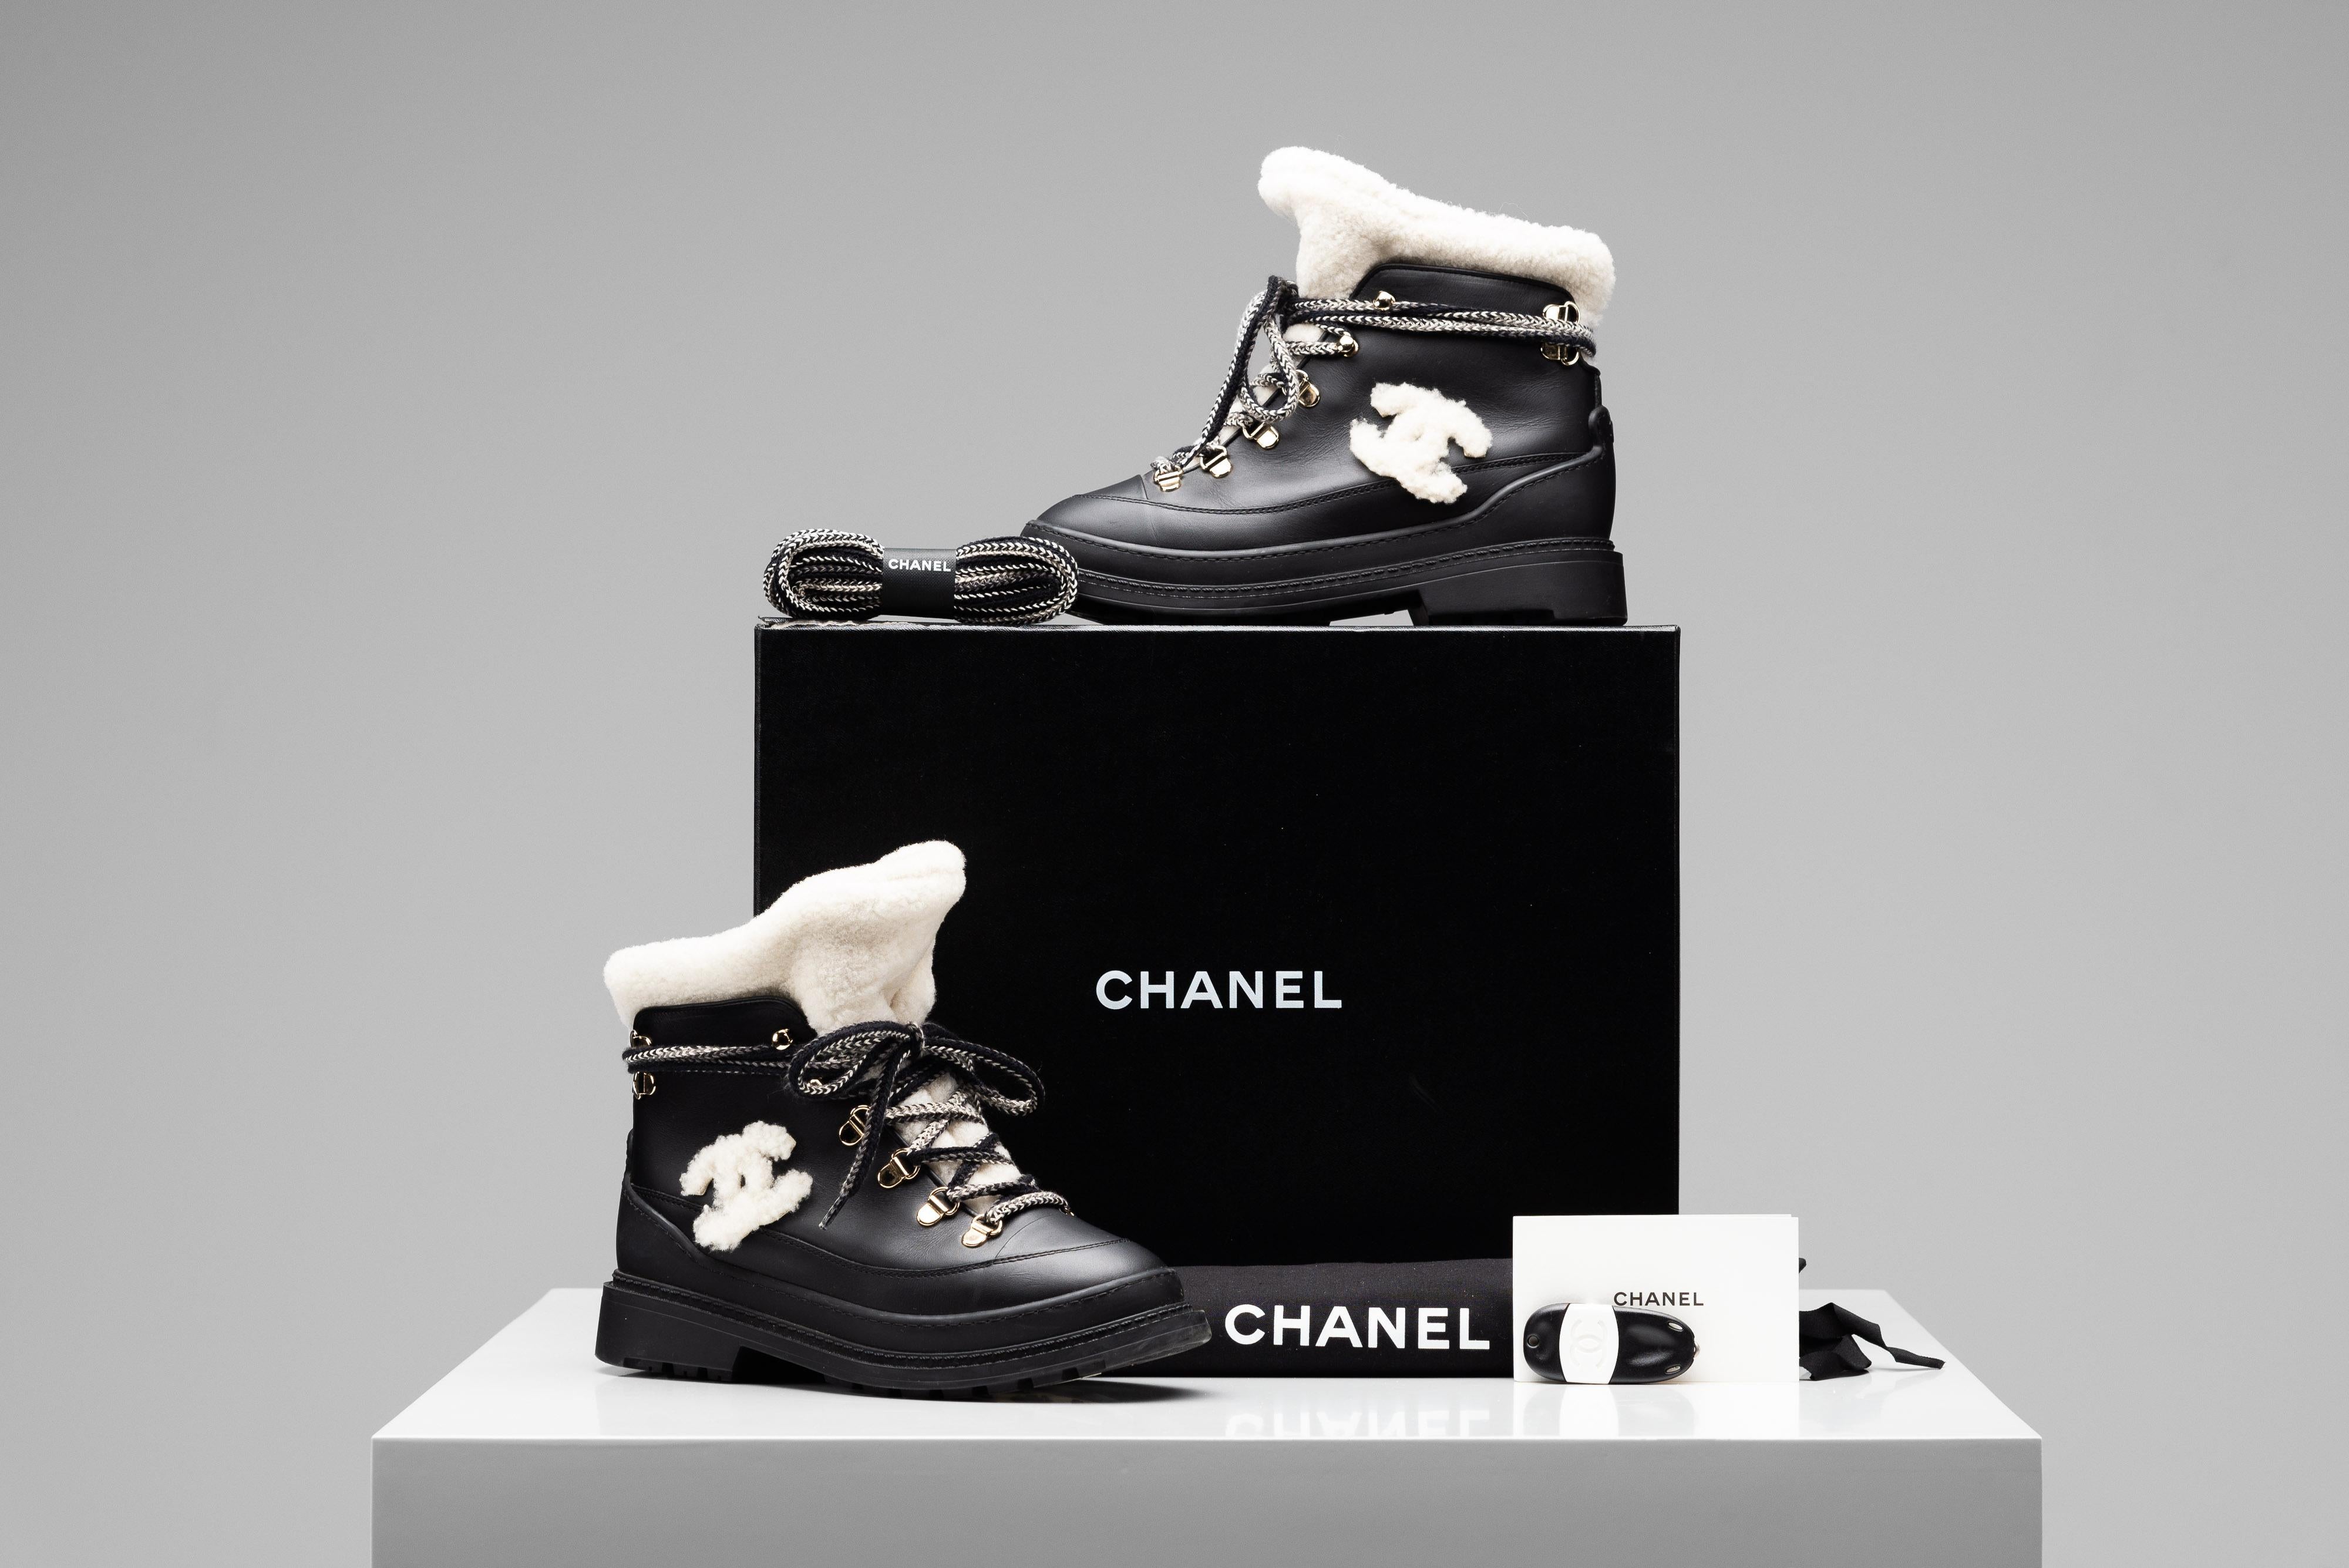 From the collection of SAVINETI we offer these pair of Chanel Winter Boots:
- Brand: Chanel
- Model: Winter Boots
- Size: 36
- Condition: Good
- Extras: Full-Set (Dustbag, Box & Receipt)

Authenticity is our core value at SAVINETI and this process